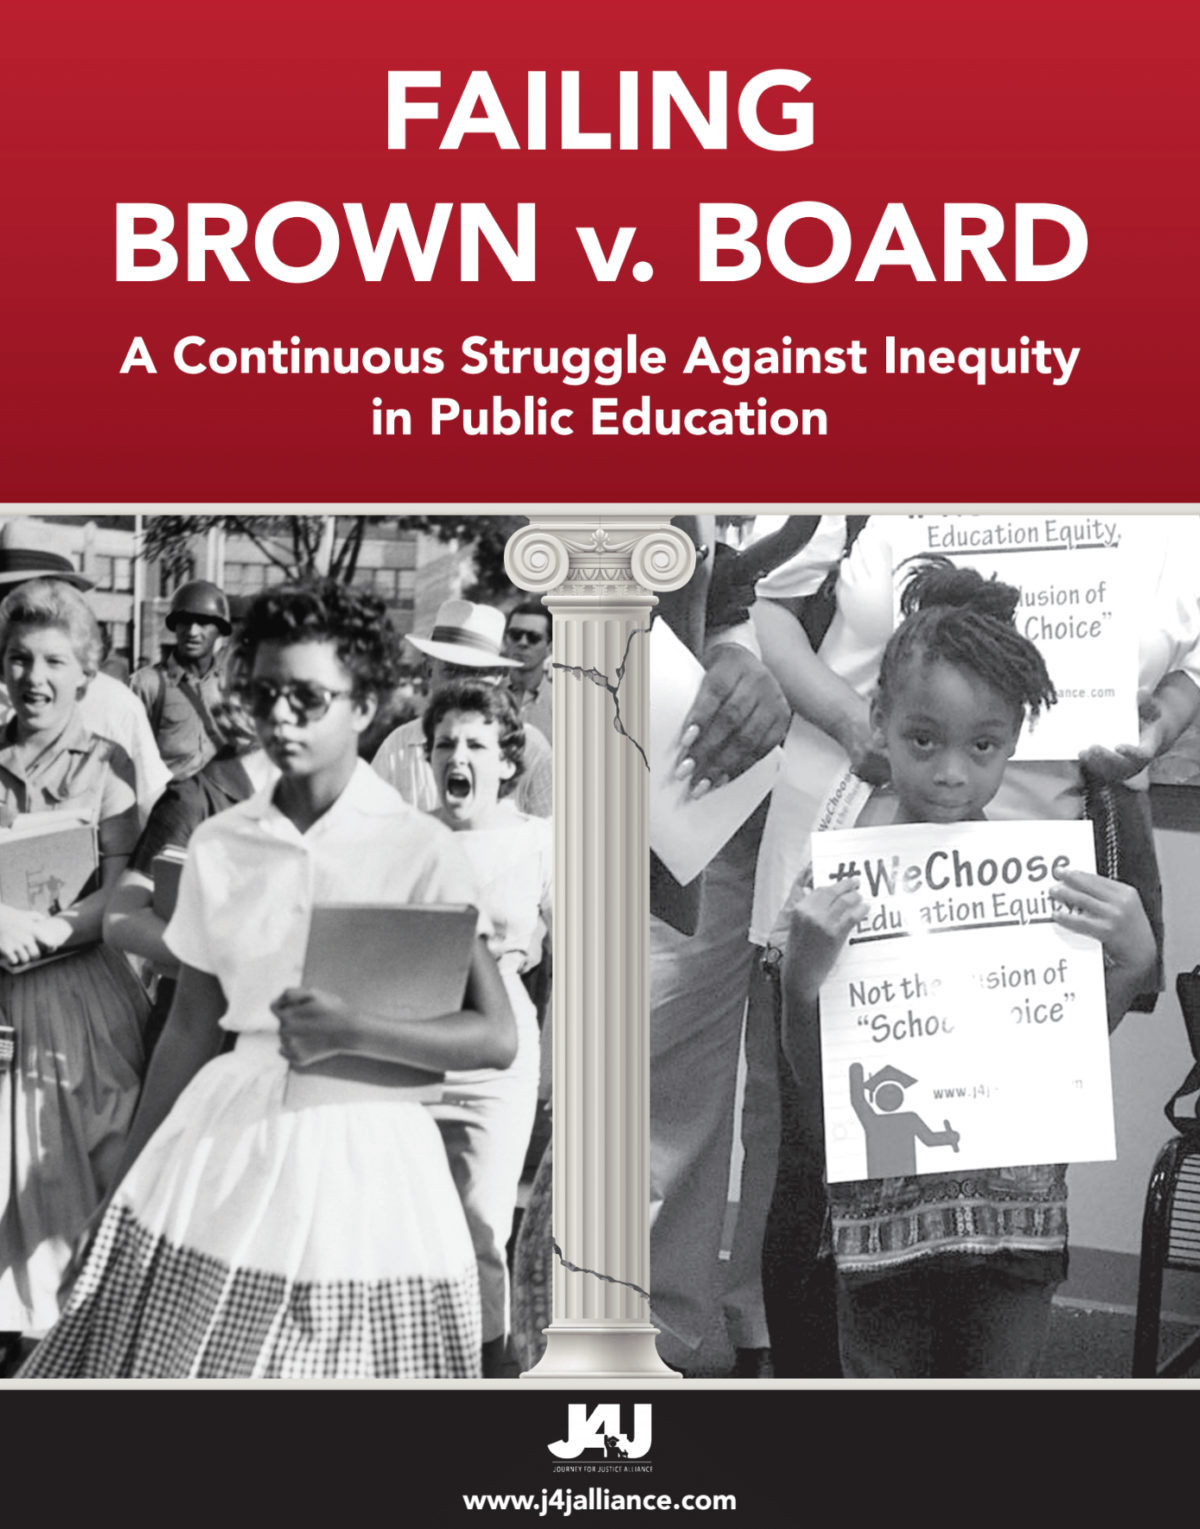 Cover image of the report Failing Brown v. Board: A Continuous Struggle Against Inequity in Public Education by the Journey for Justice Alliance.